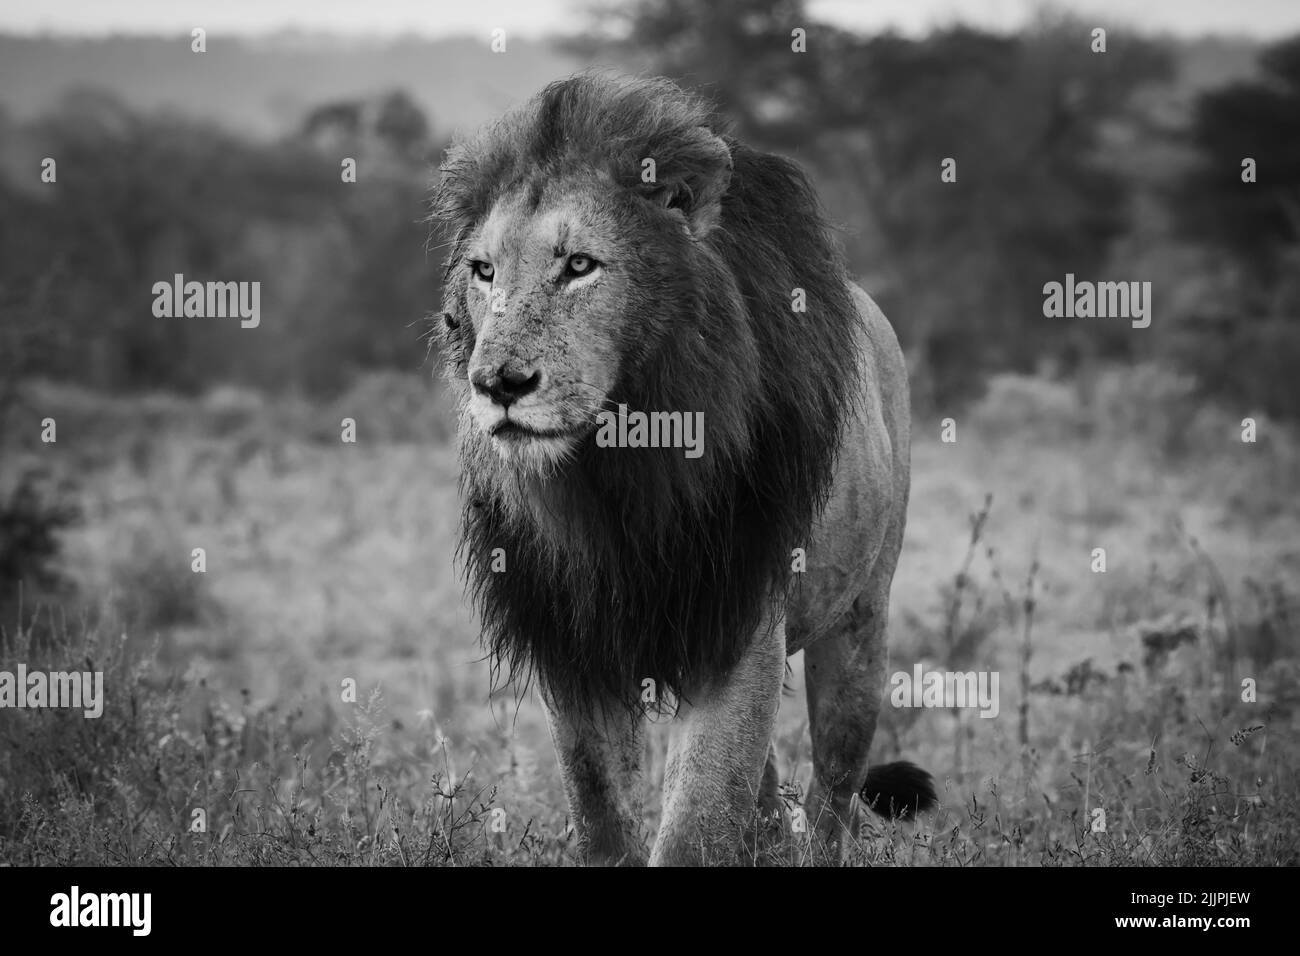 Male Lion striding purposely through veld Stock Photo